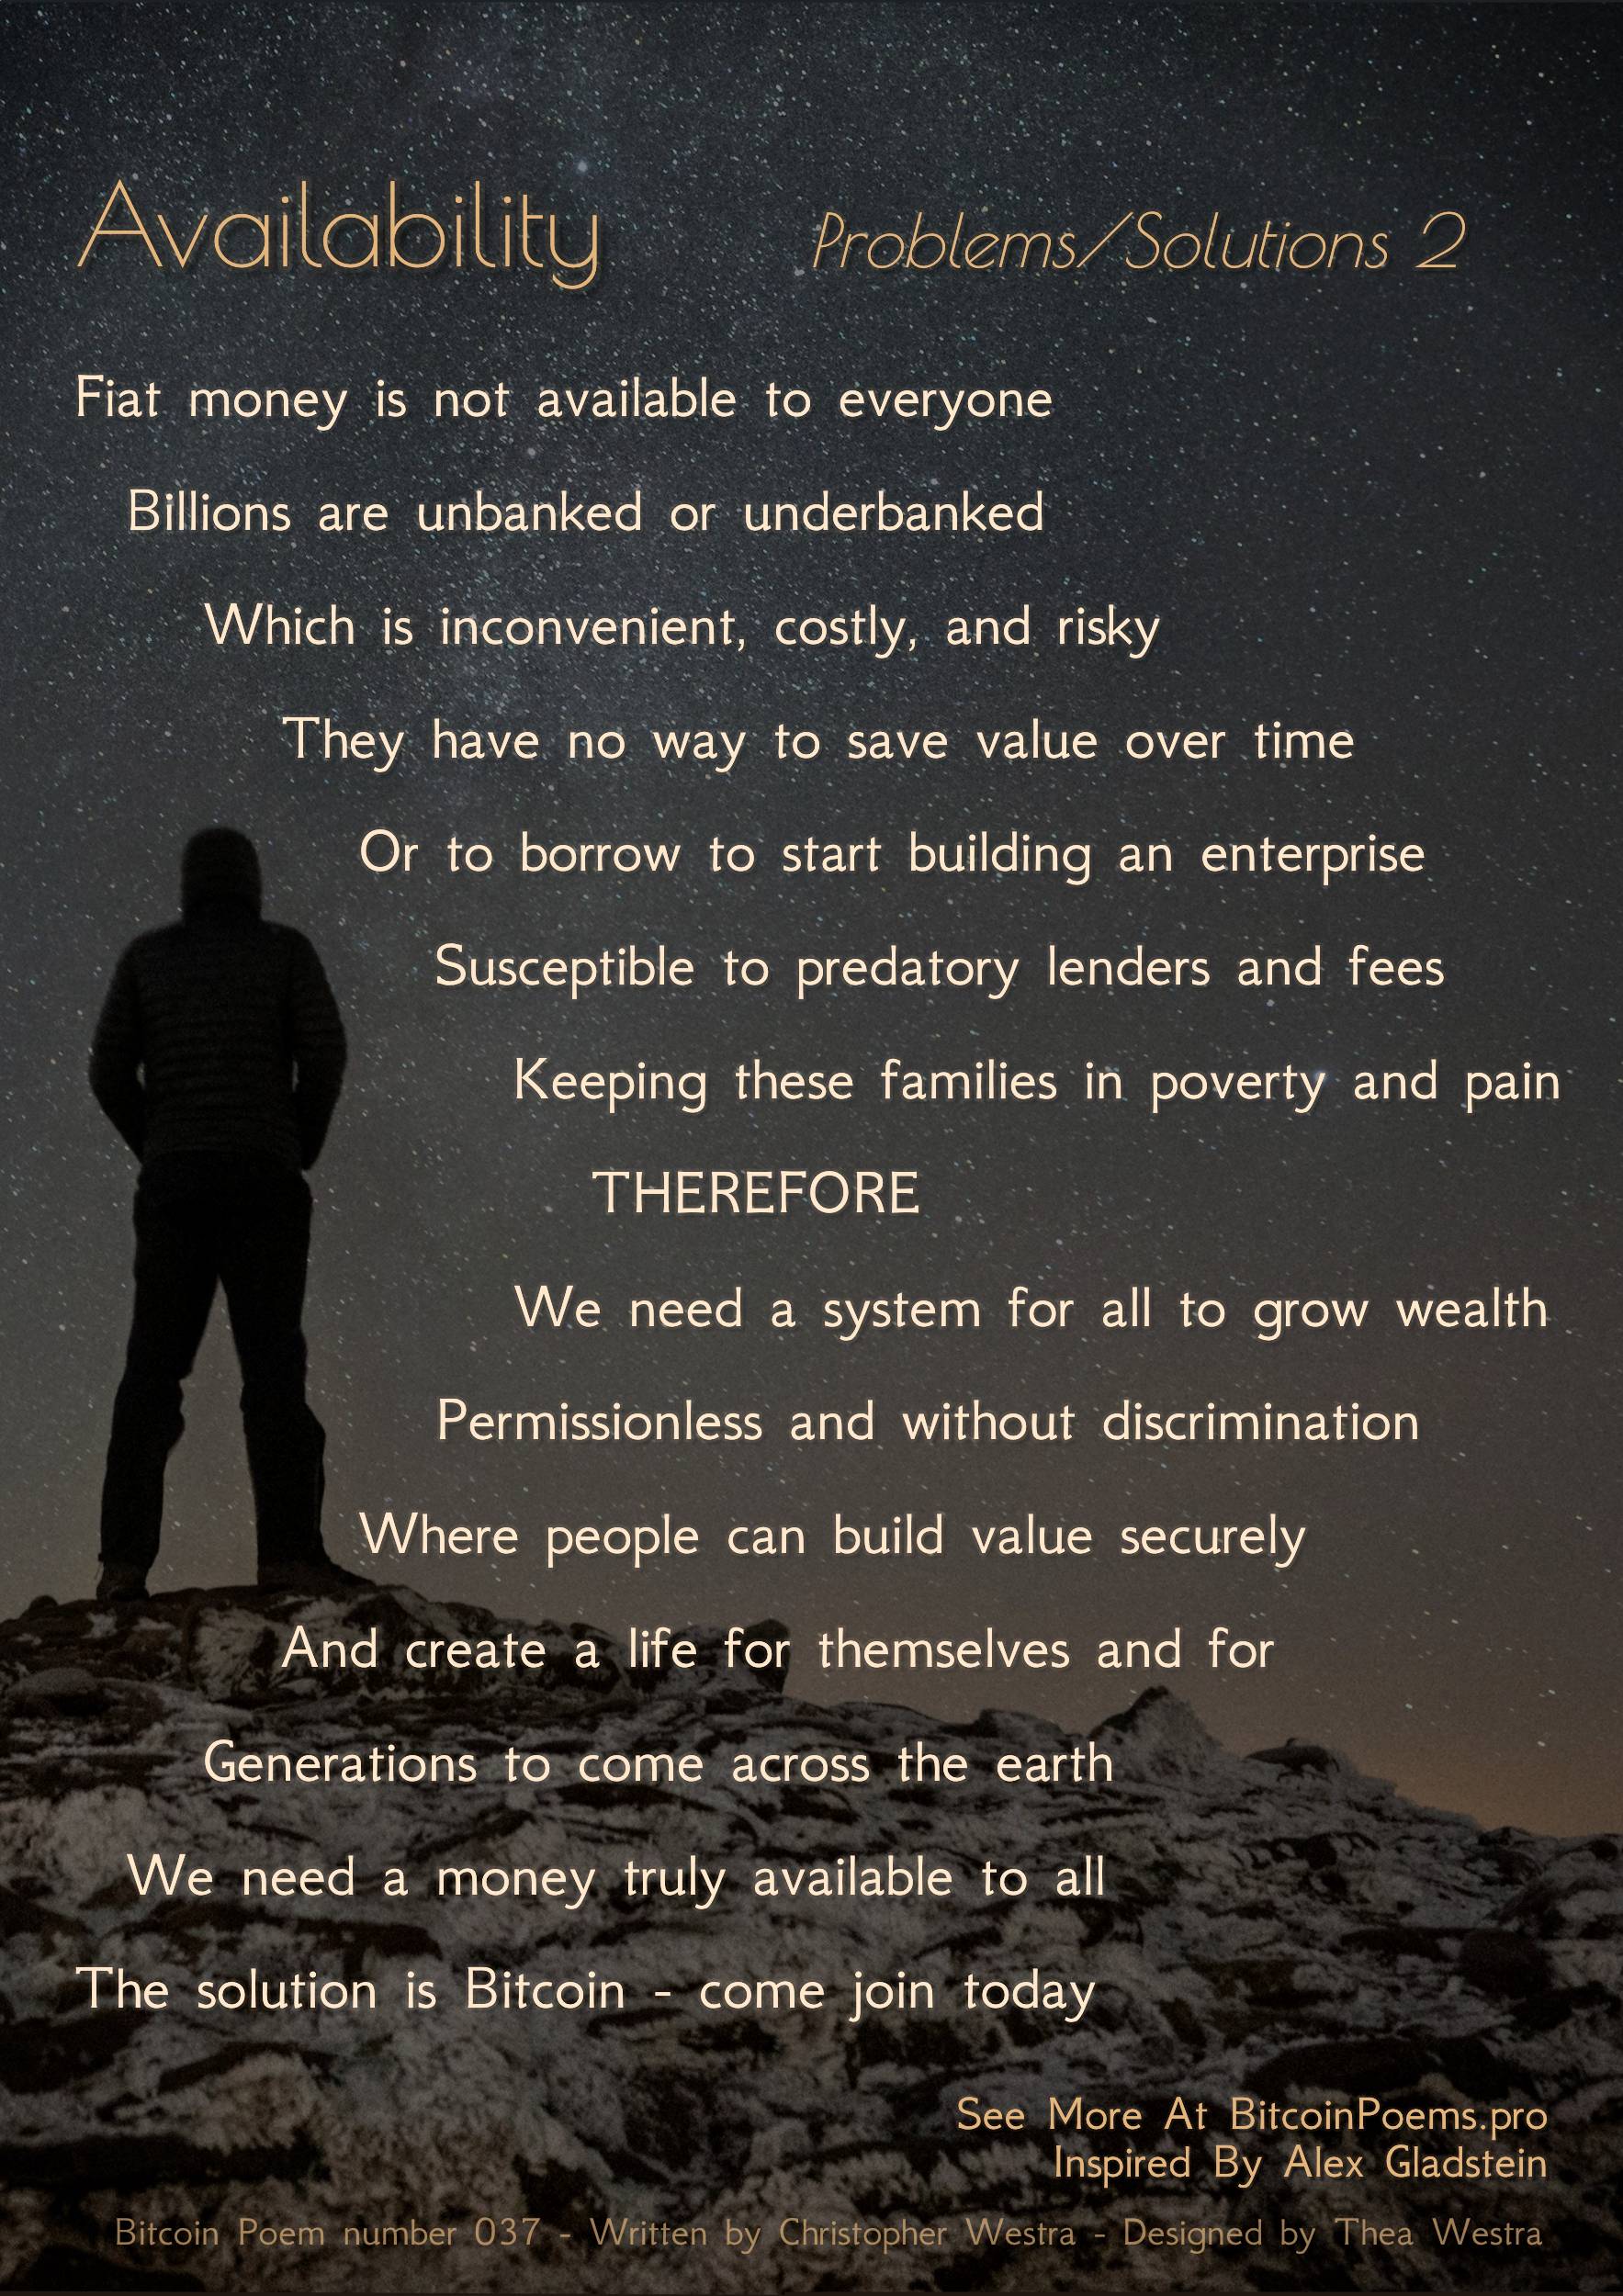 Availability - Bitcoin Poem 037 by Christopher Westra